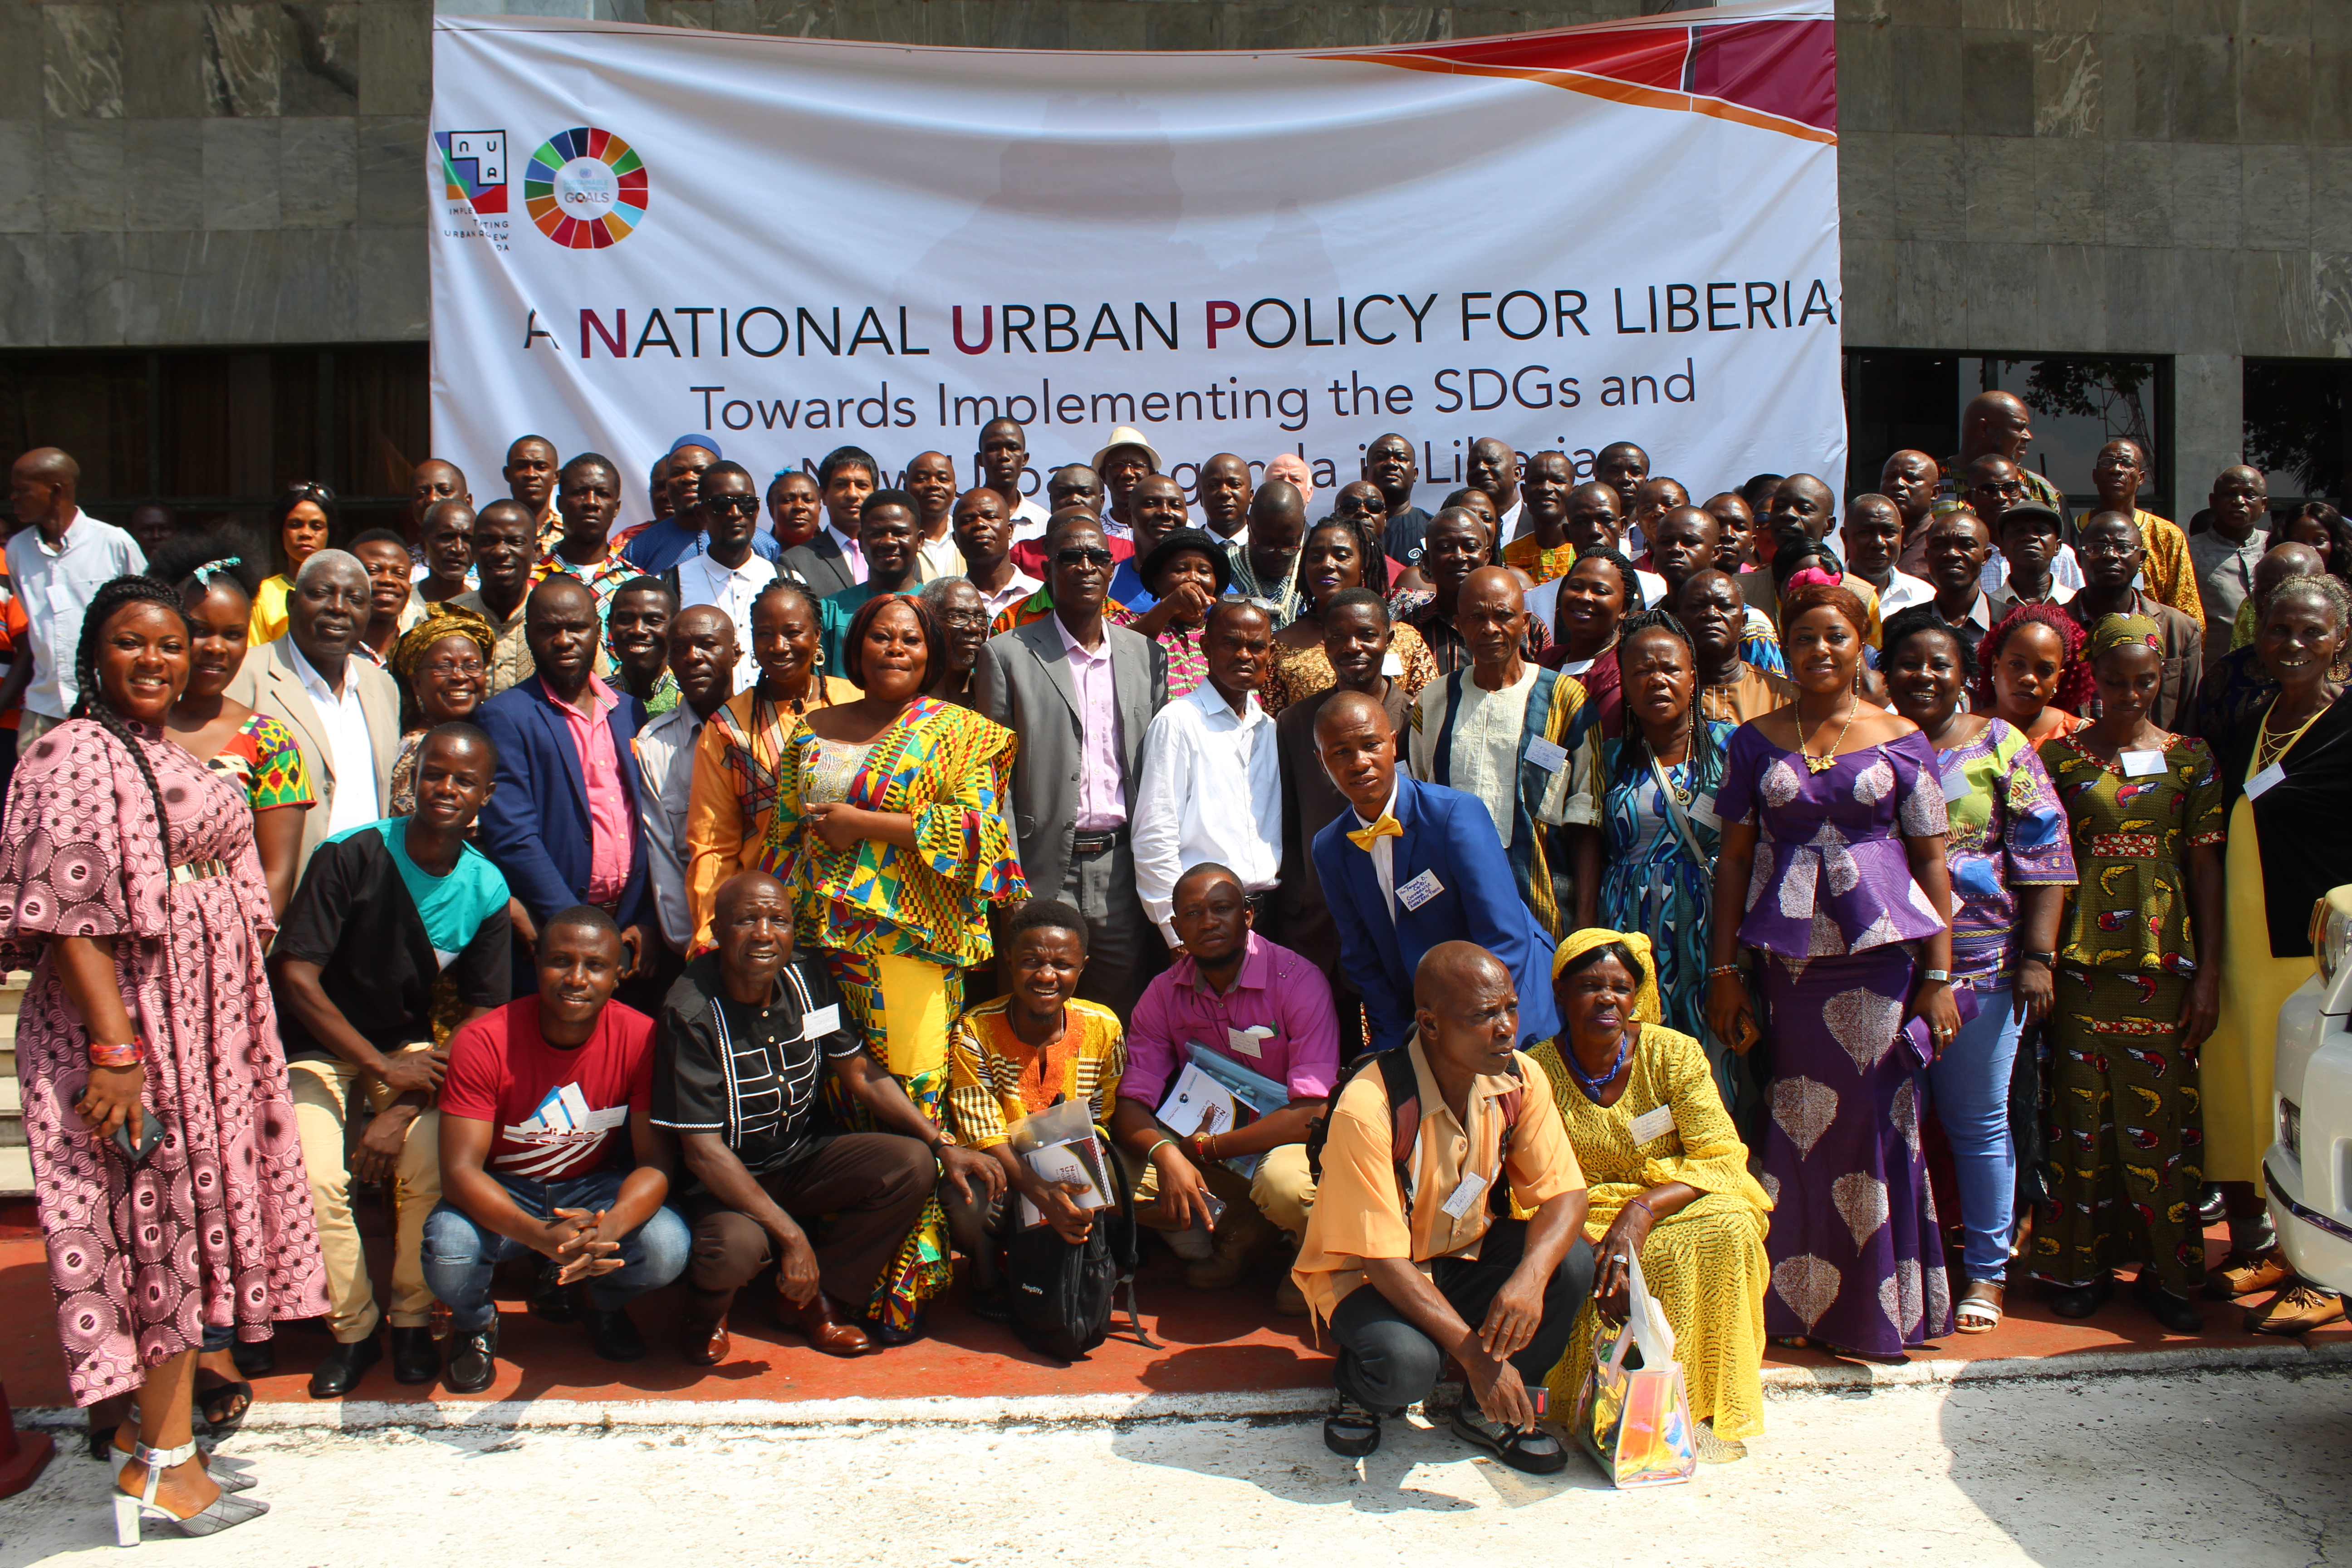 Participants of the National Urban Forum from different parts of Liberia pose for a photo outside Monrovia City Hall, Monrovia.